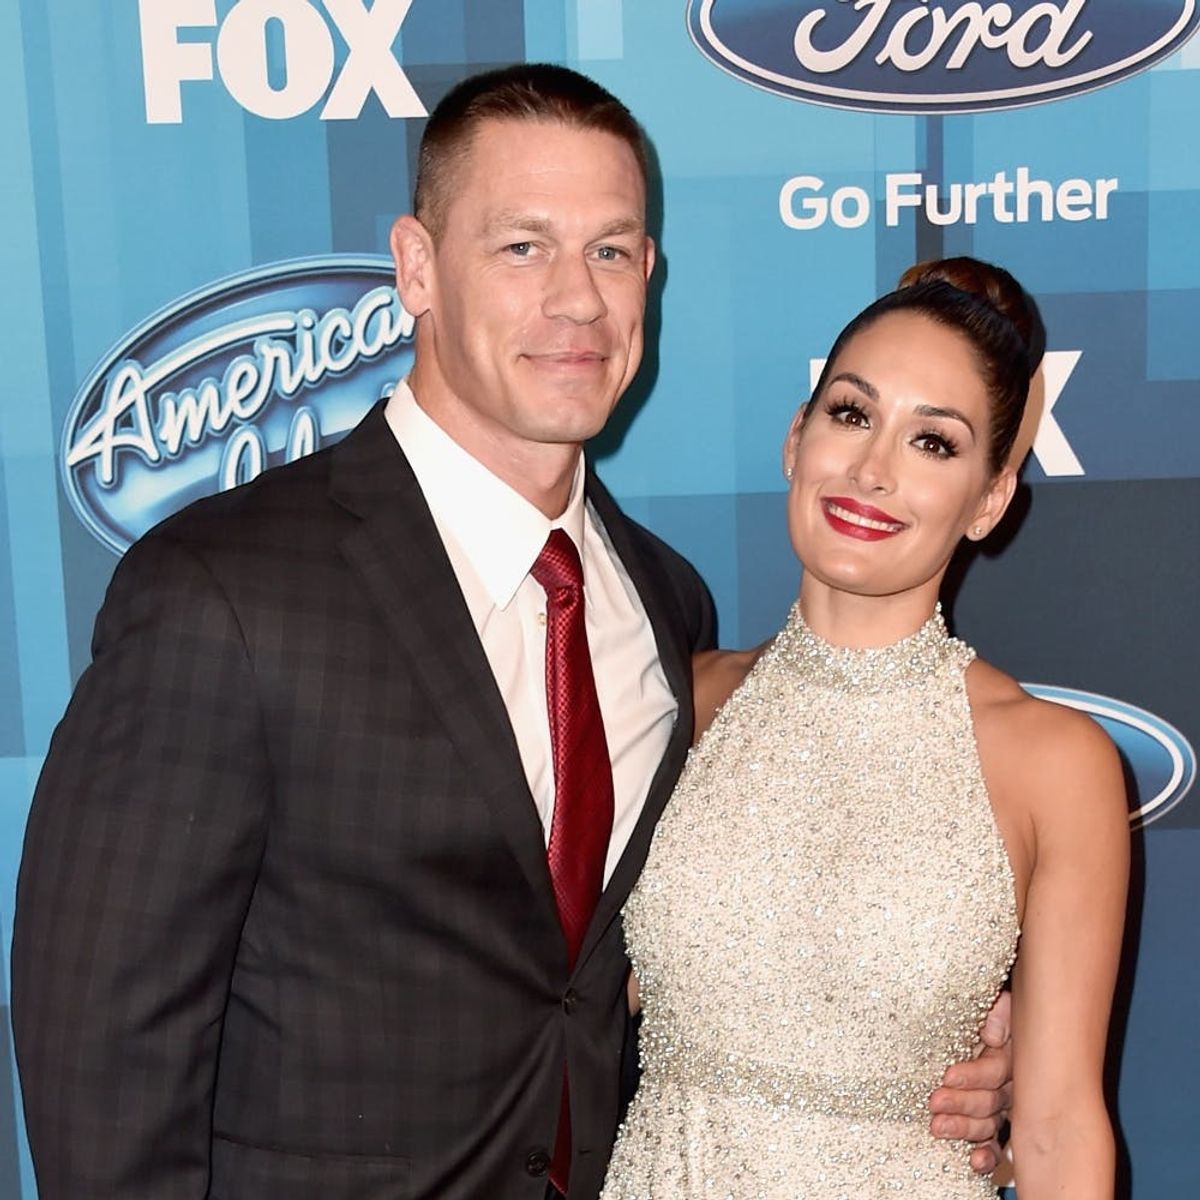 John Cena Has This One Super Sweet Requirement for His Wedding With Nikki Bella